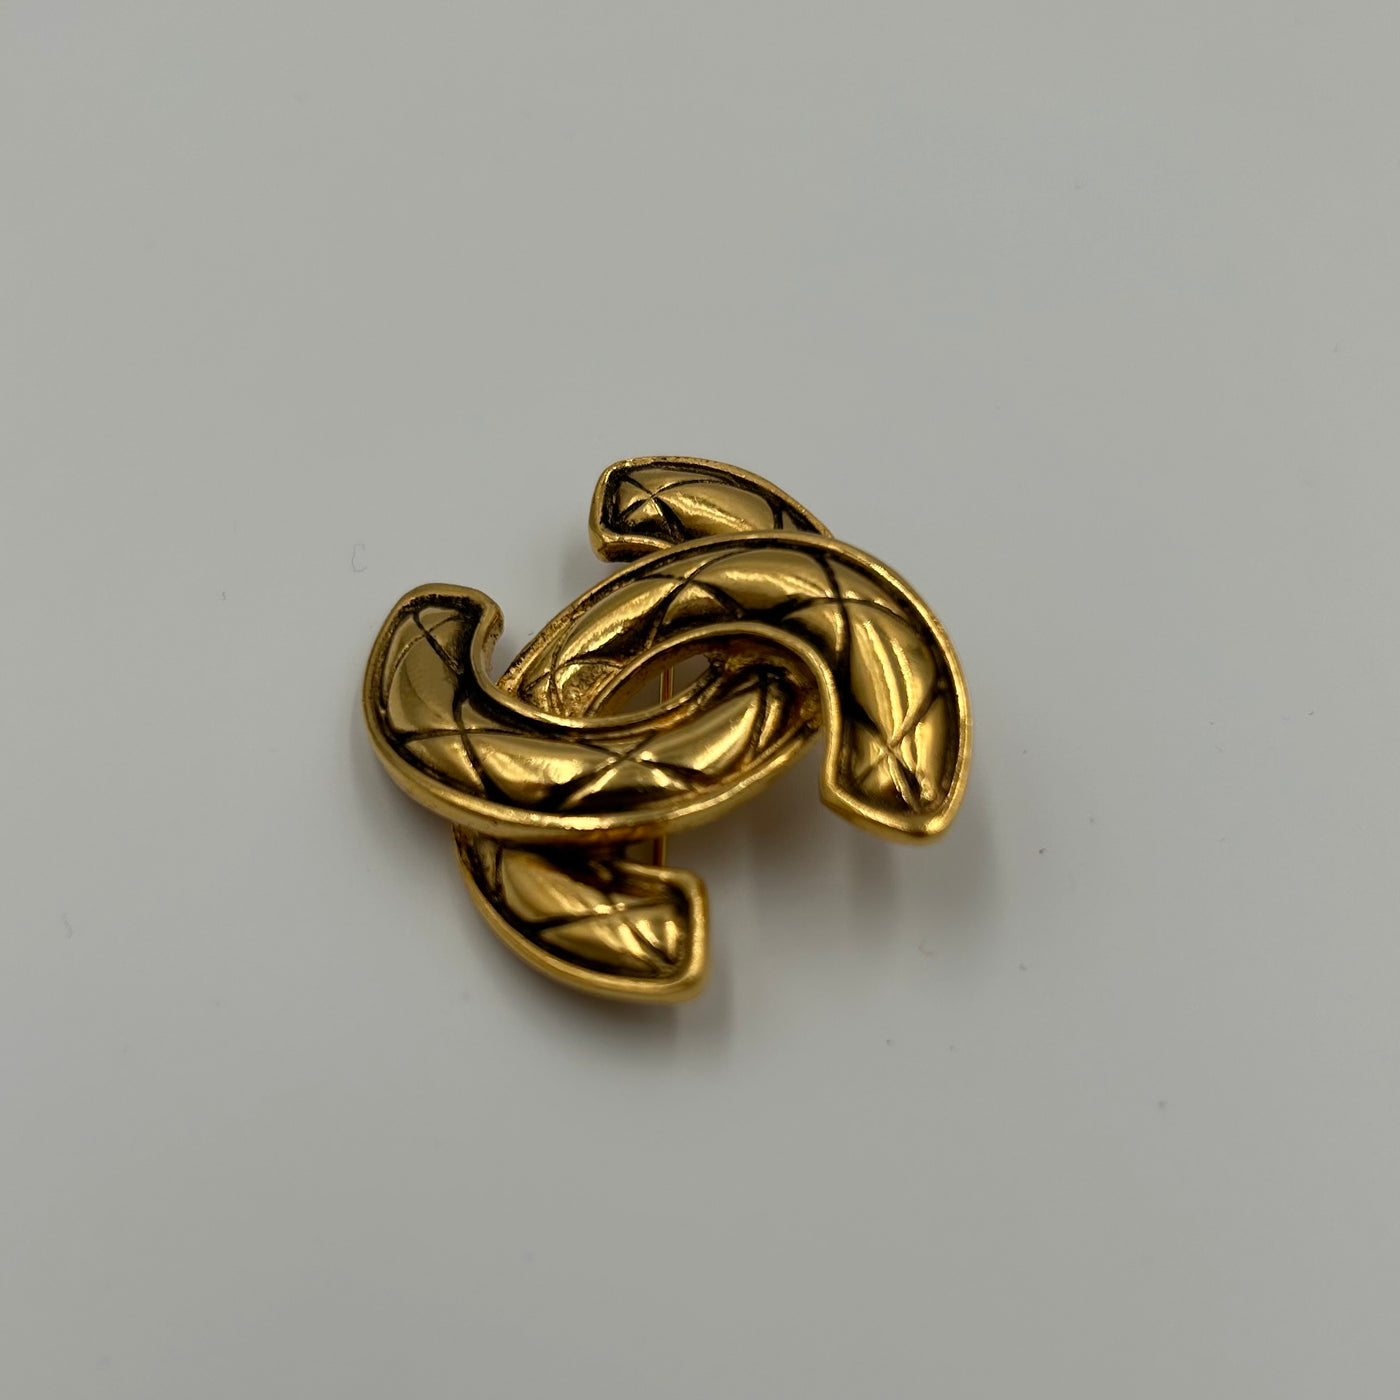 CHANEL Vintage CC quilted gold brooch